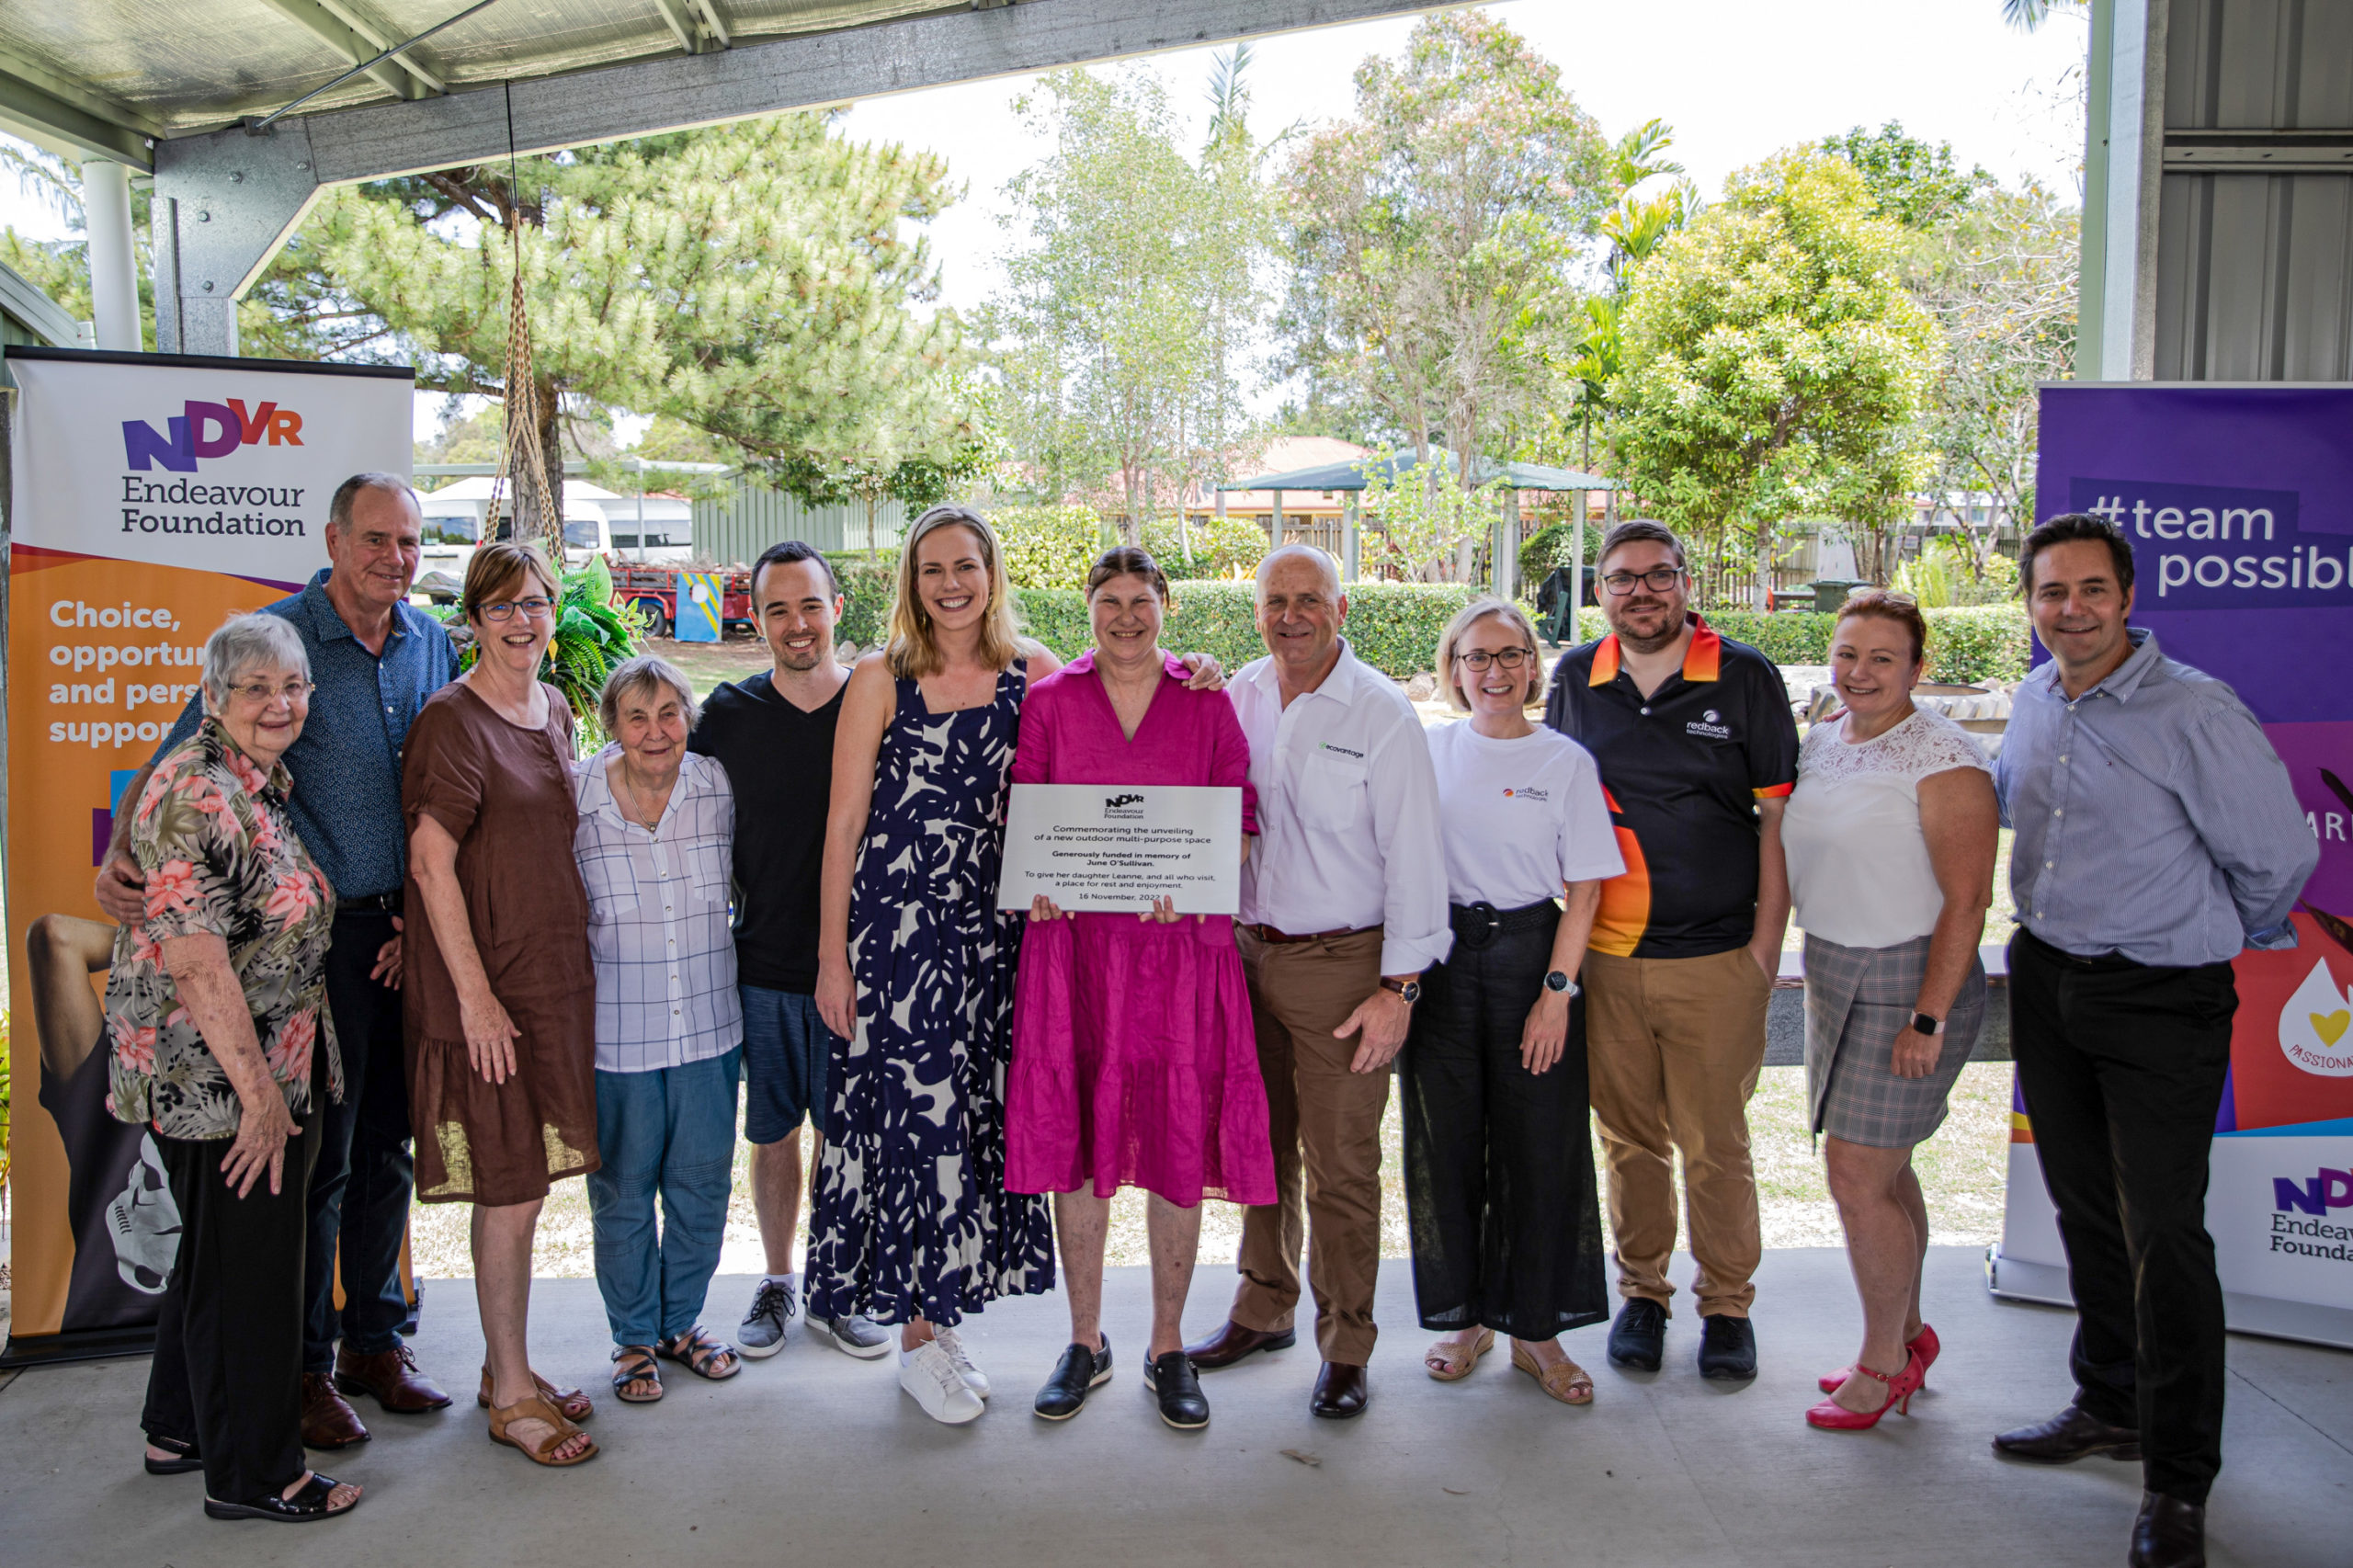 Representatives of Endeavour, Redback Technologies and Ecovantage Solar pose for photograph with the donors at the L&L Centre in Bundaberg